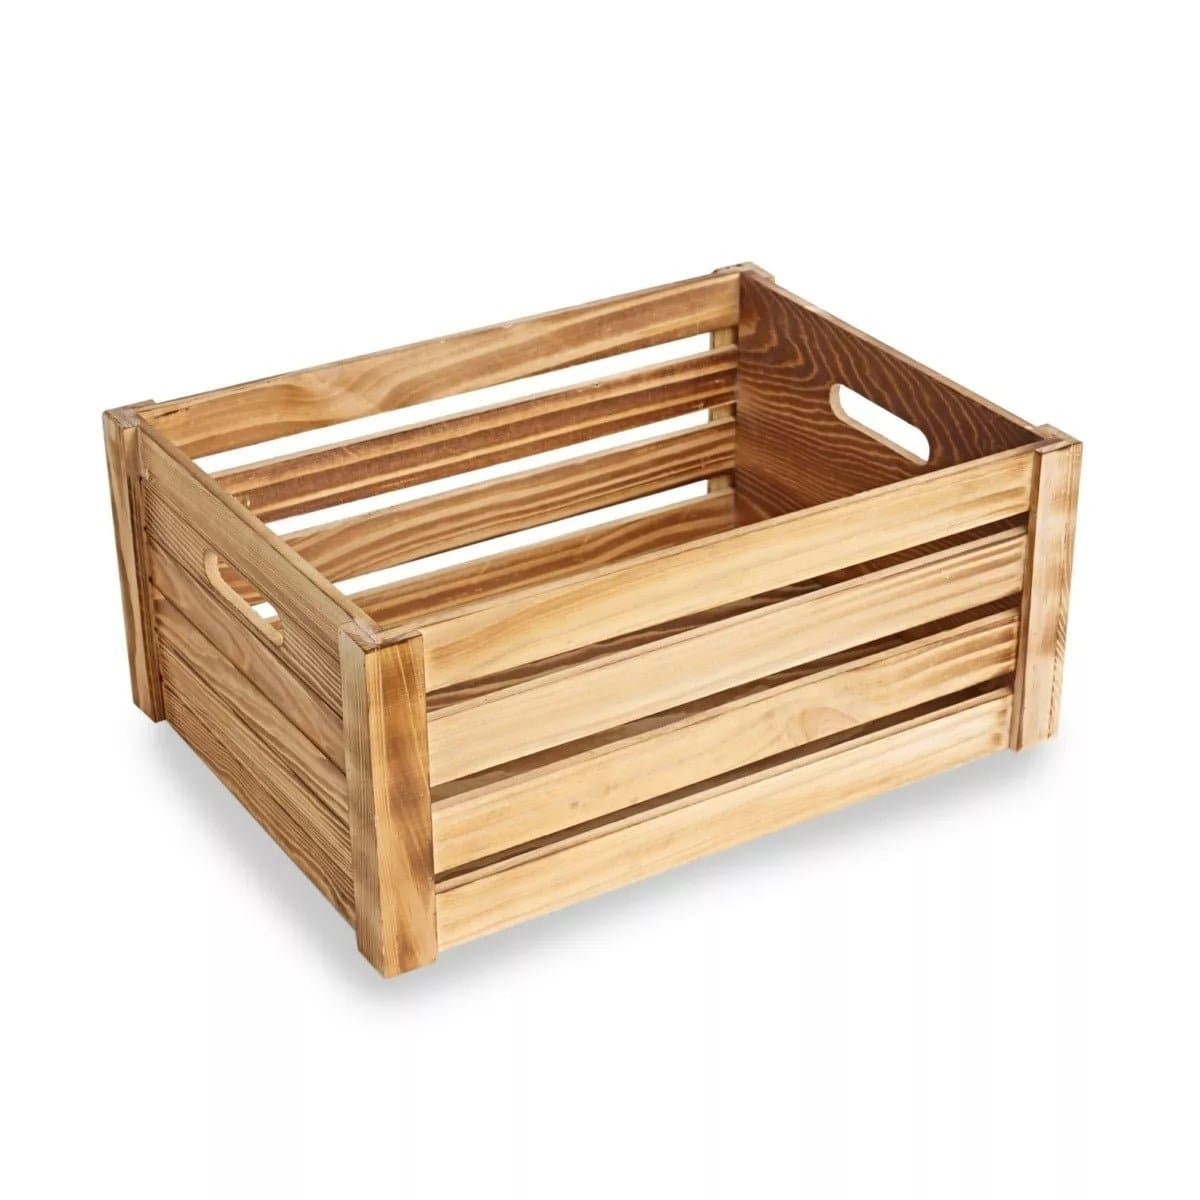 Large Rustic Wooden Crate - bhma